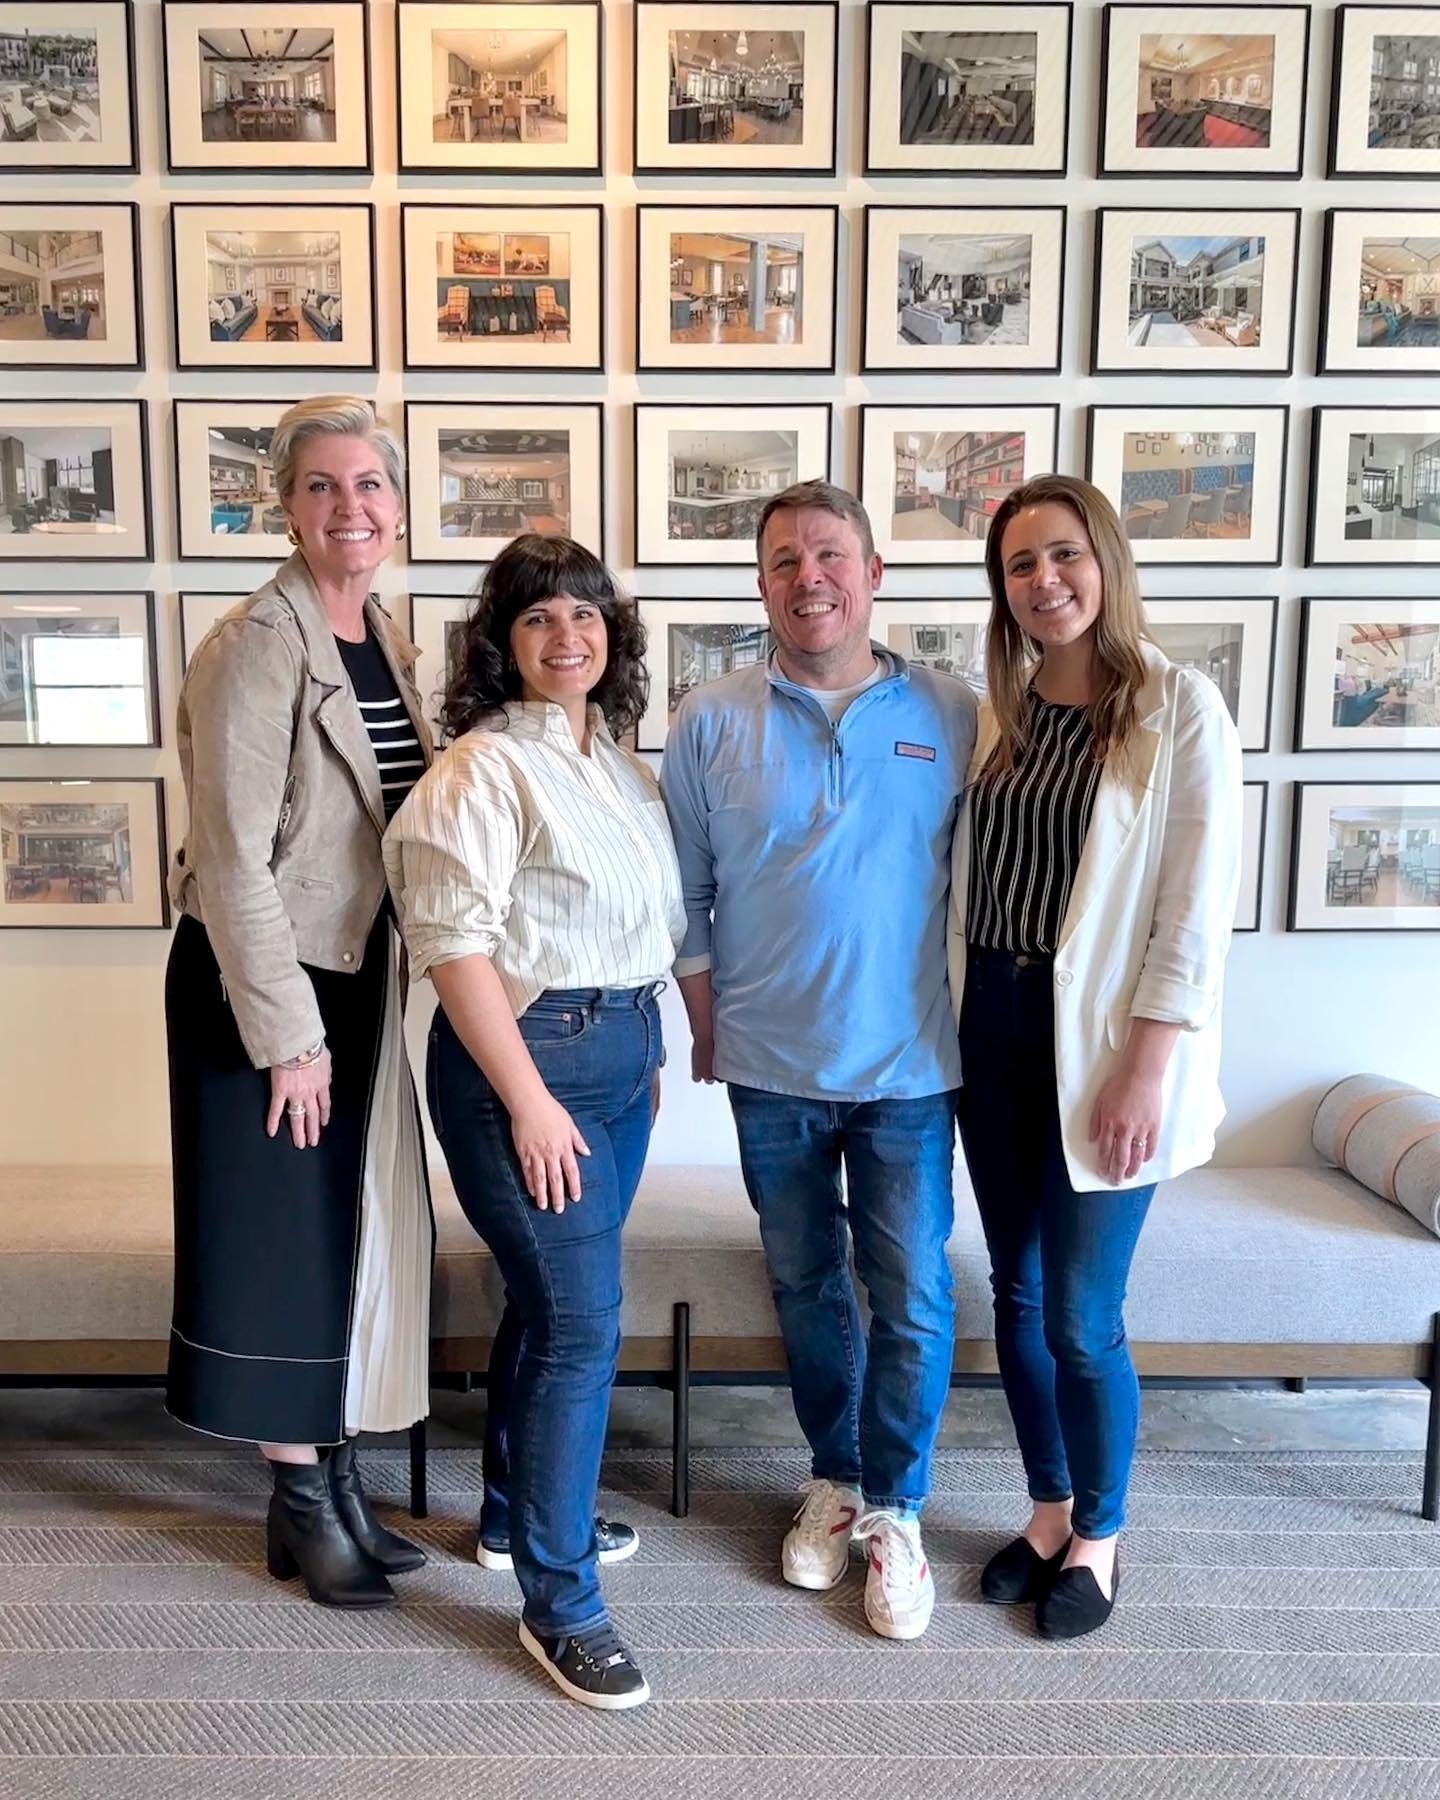 San Mateo, CA ✈️➡️ Atlanta, GA

Our team traveled to Atlanta this week for the @efamagazine Conference + Expo, and we stopped by the @bdstudiocollection Headquarters for a fun visit with our sister studio friends!

#environmentsforaging #efa #seniorc